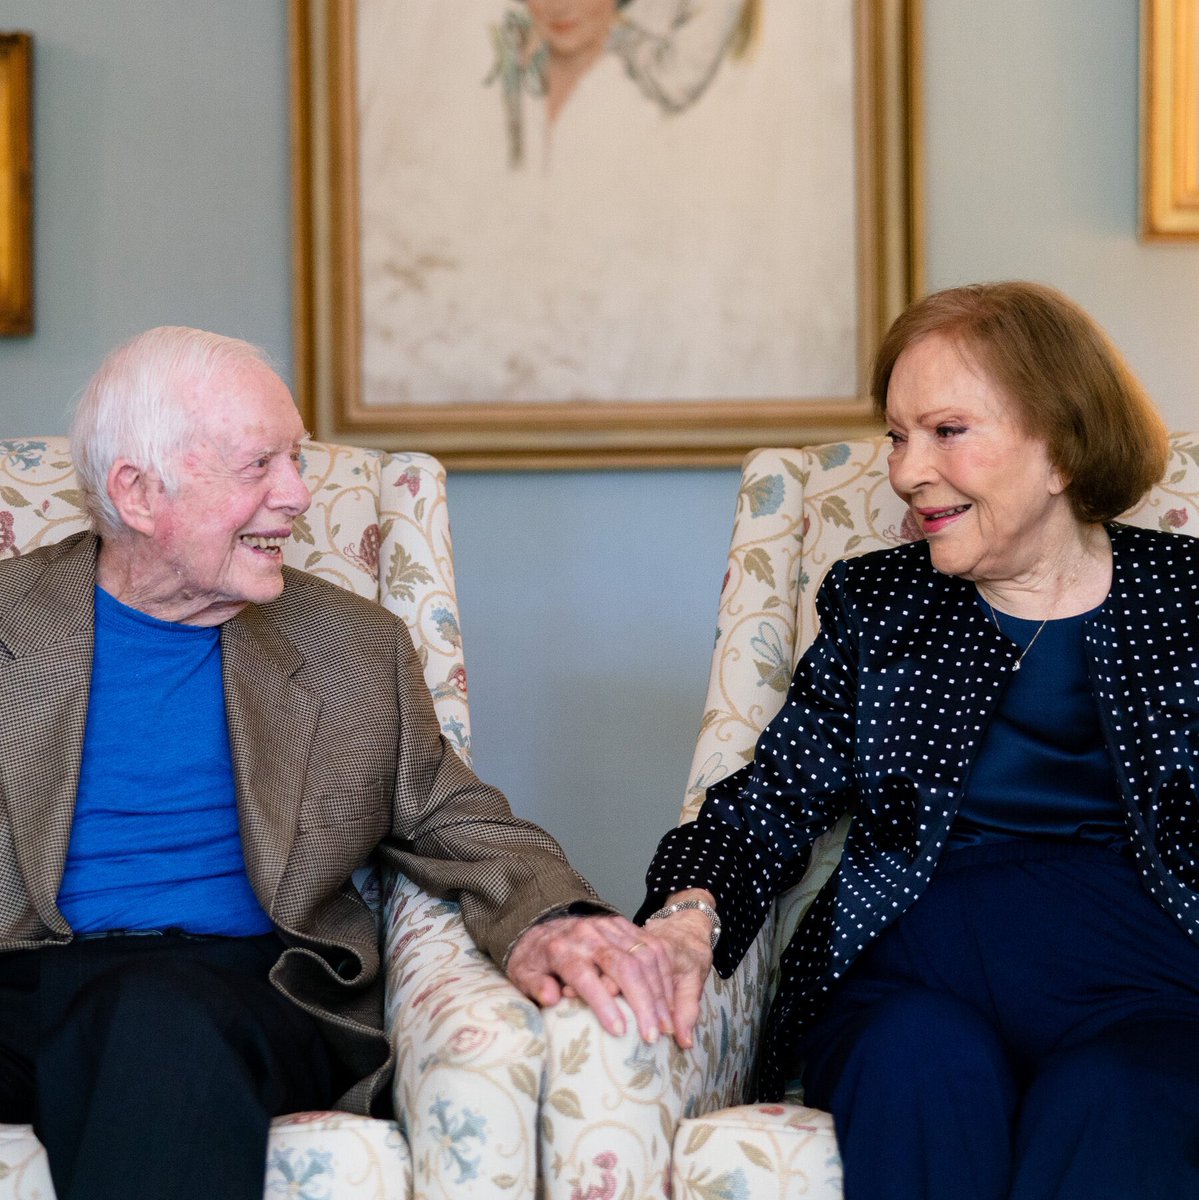 Former First Lady #RosalynnCarter passed away today. She was the wife of former President Jimmy Carter. 

While Carter’s Presidency was often looked down upon as one of the worst admins in US history, there is no denying that he and his wife both were humble servants and led